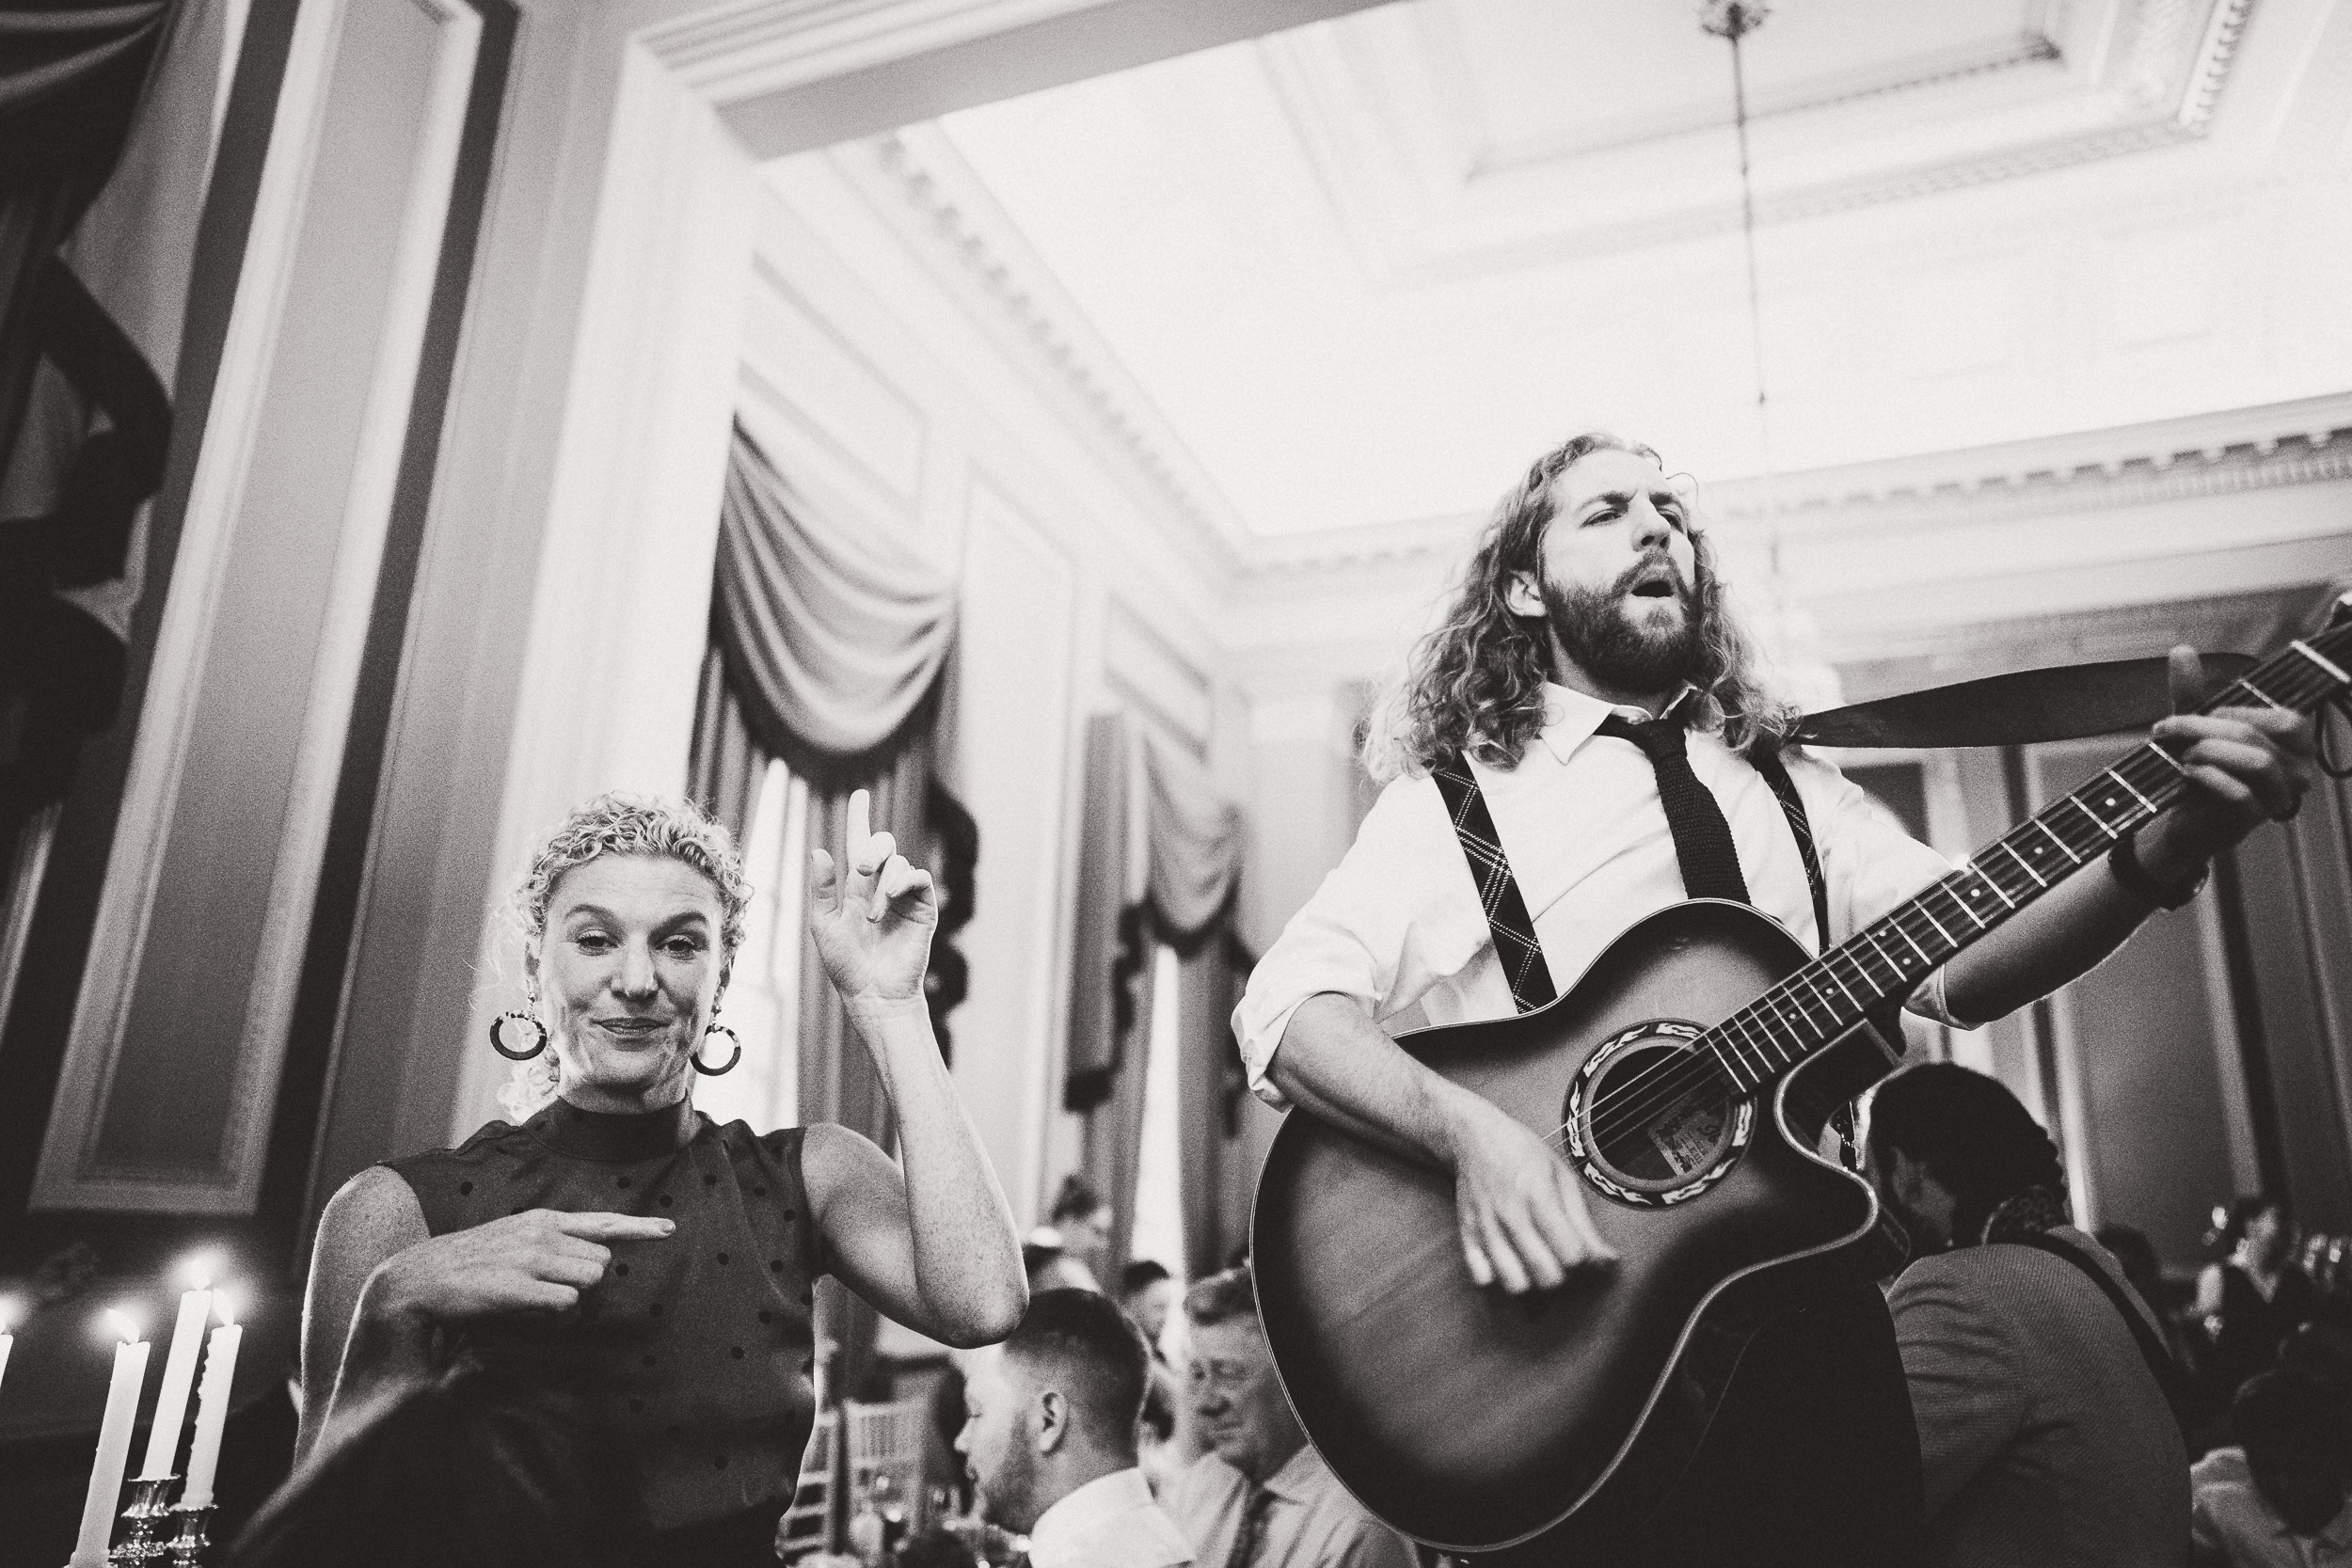 A couple serenading each other with an acoustic guitar during their wedding ceremony photographed by a wedding photographer.